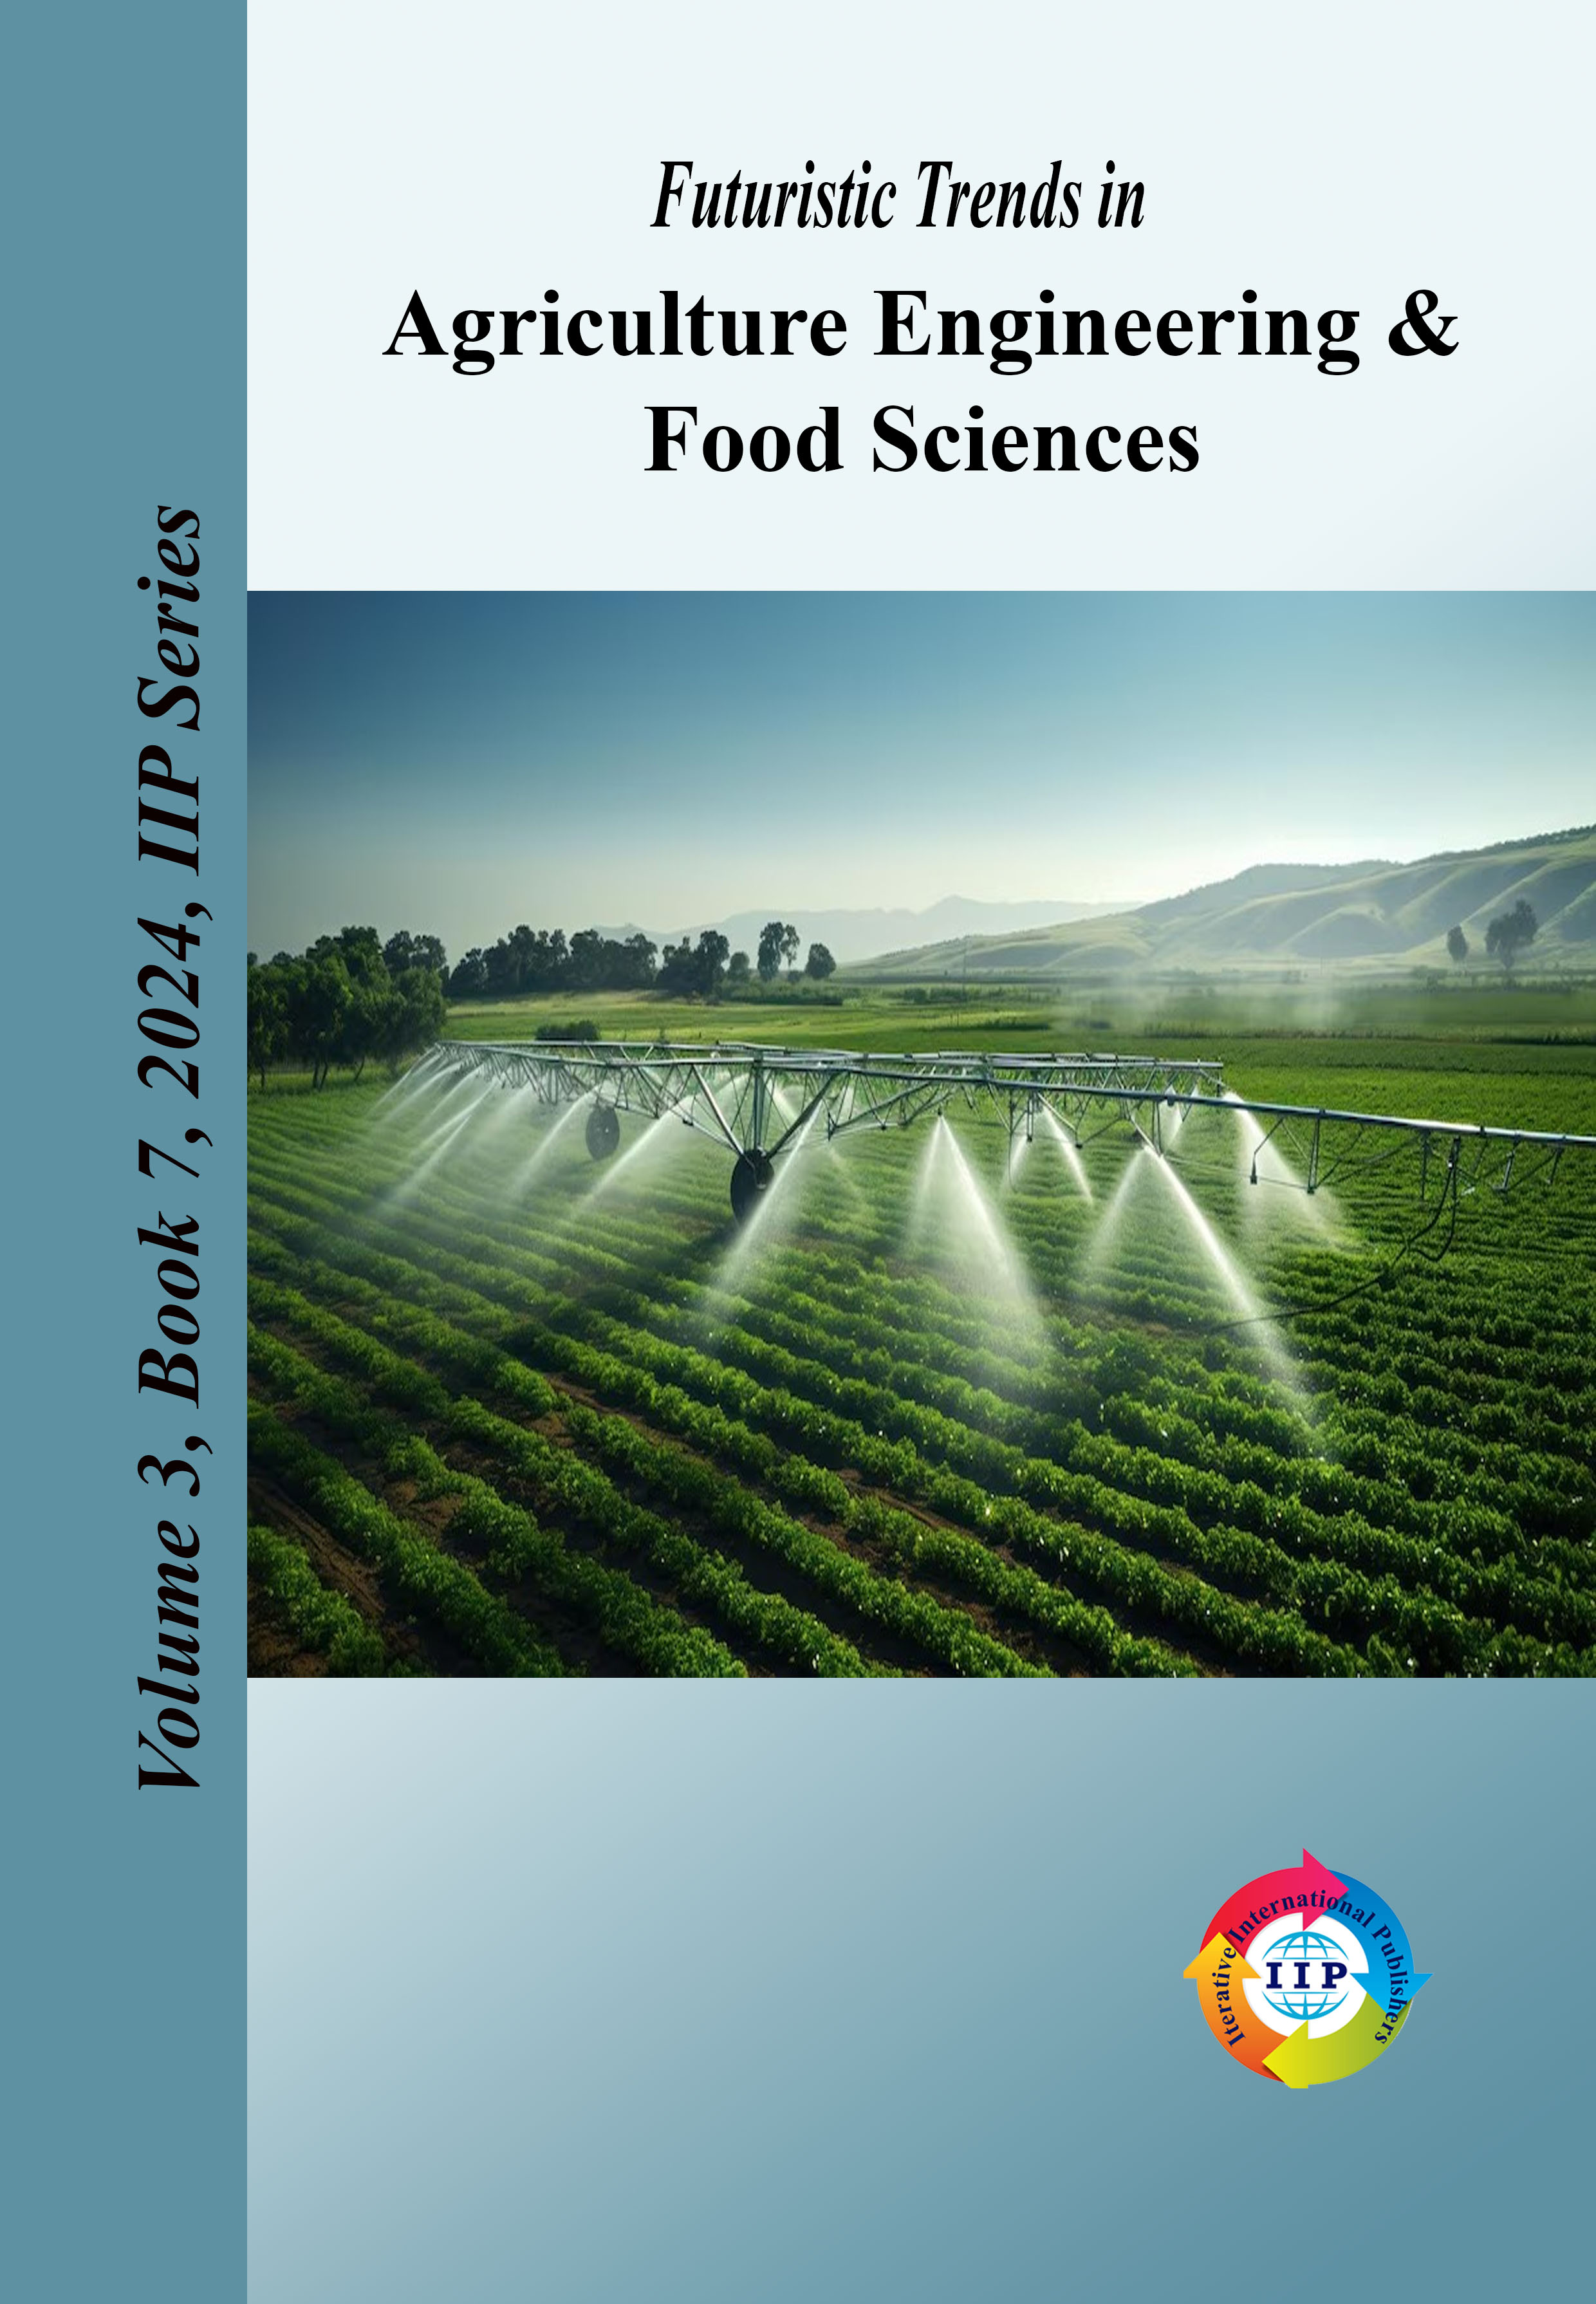 Futuristic Trends in Agriculture Engineering & Food Sciences Volume 3 Book 7